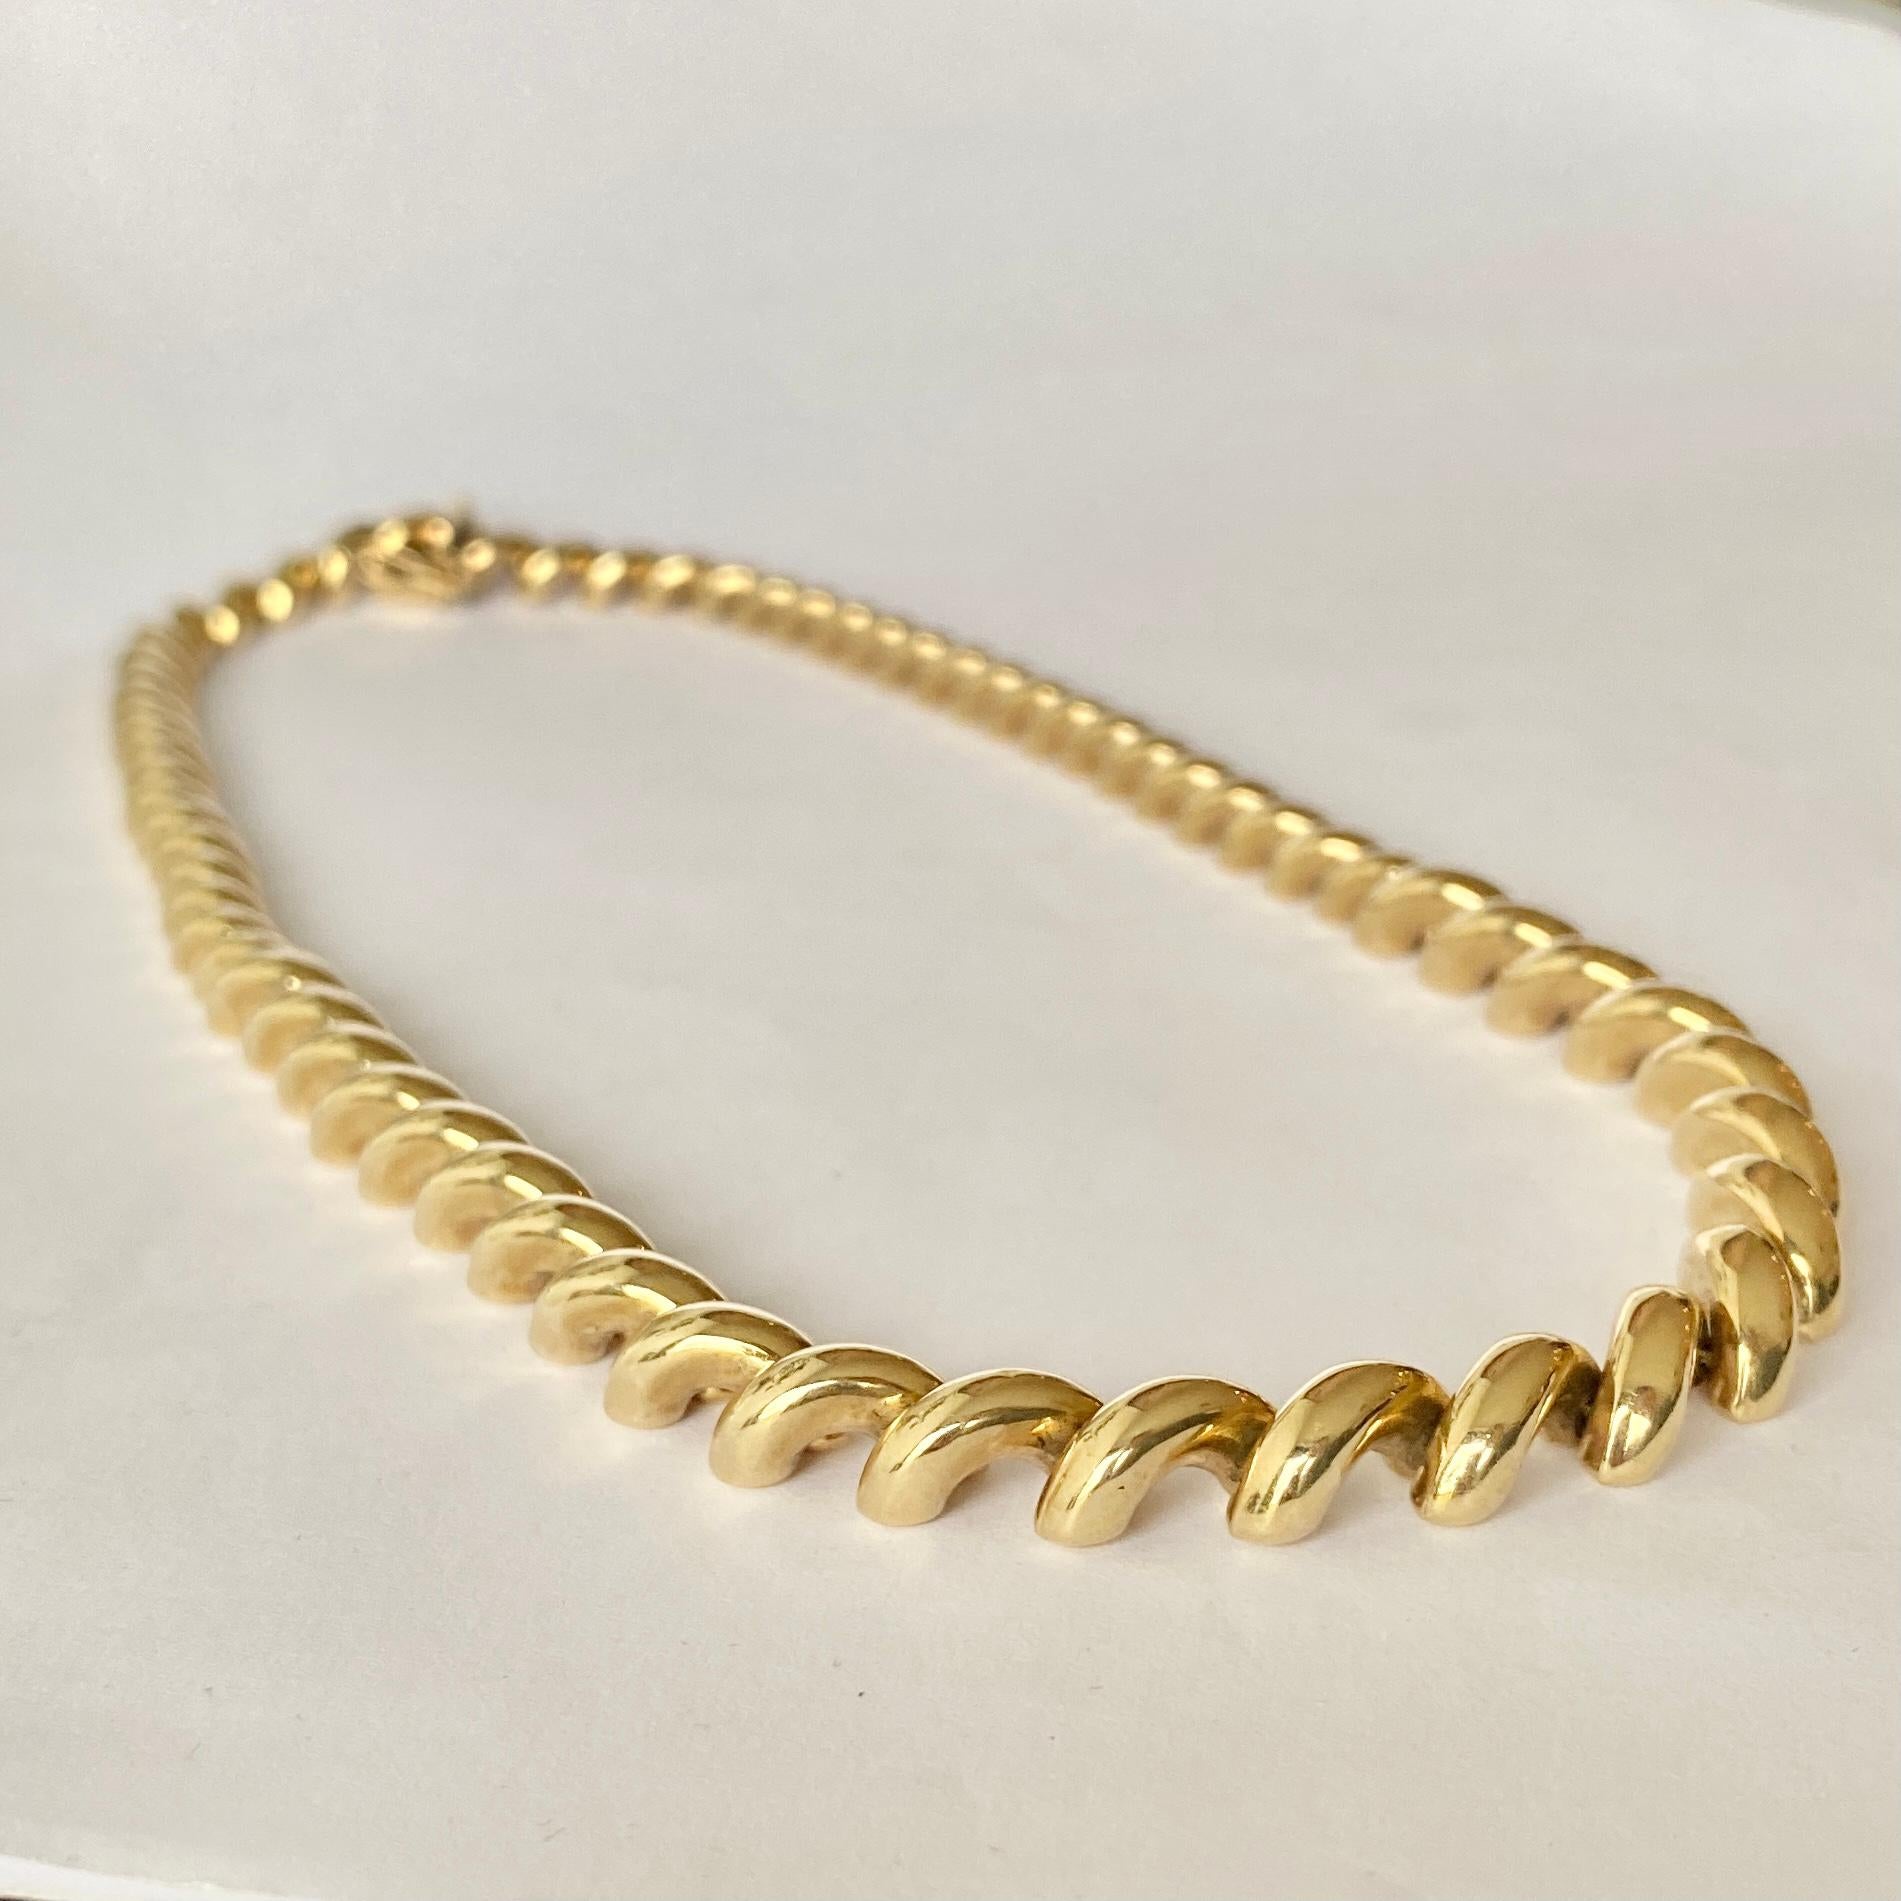 This stunning necklace has a chunky look to it and is modelled in 9carat gold. The underside of the necklace is fat so sits on the neck beautifully. The necklace is slightly graduated starting with the slimmer part of the chain at the clasp and